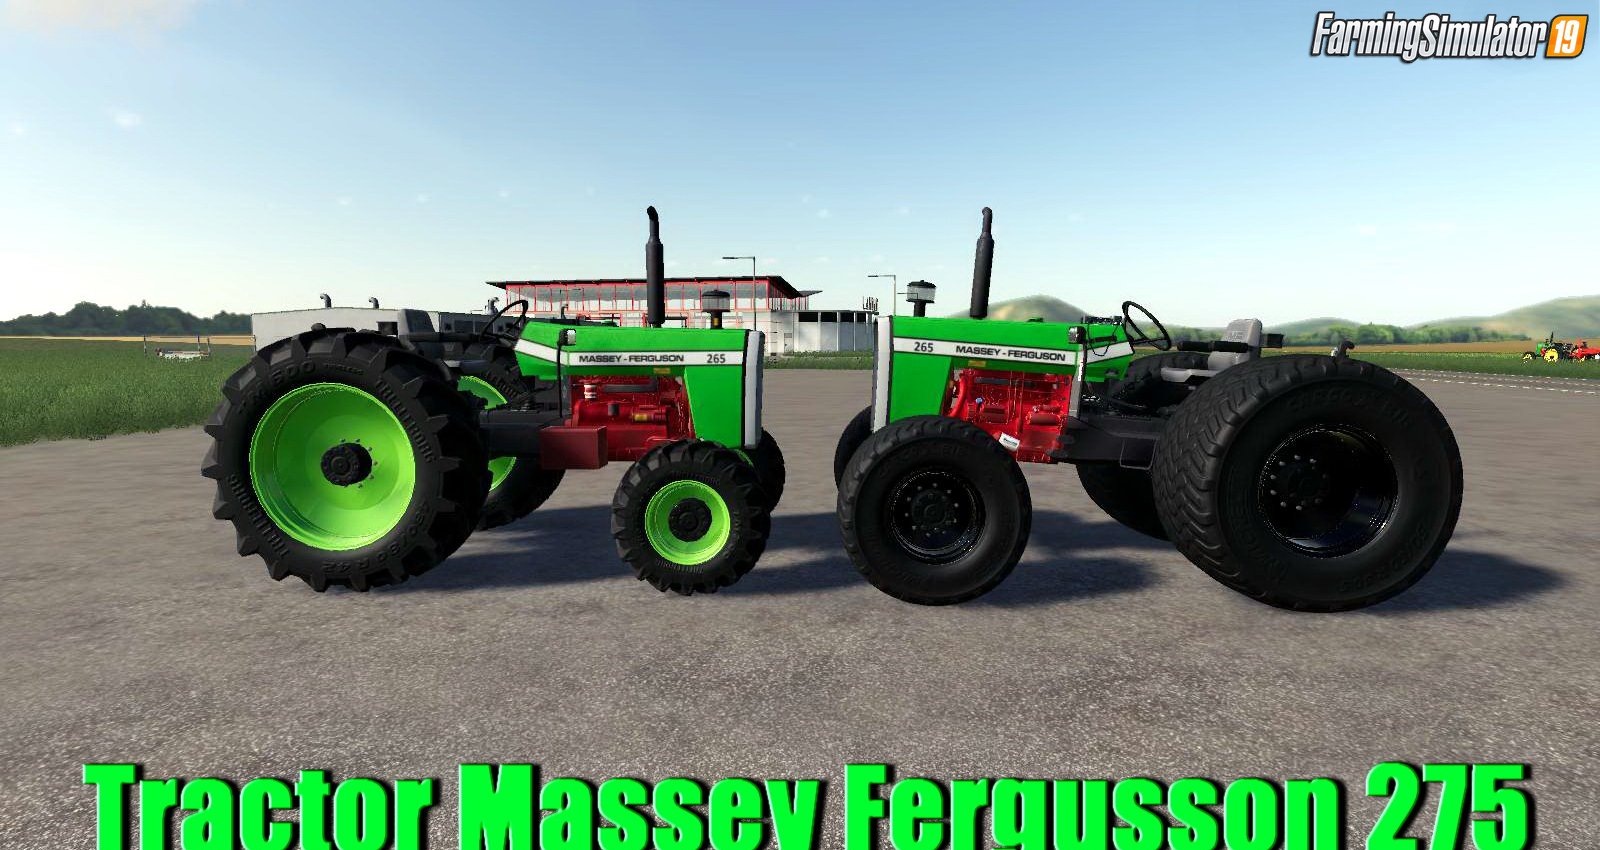 Tractor Massey Fergusson 275 by Cranca for FS19